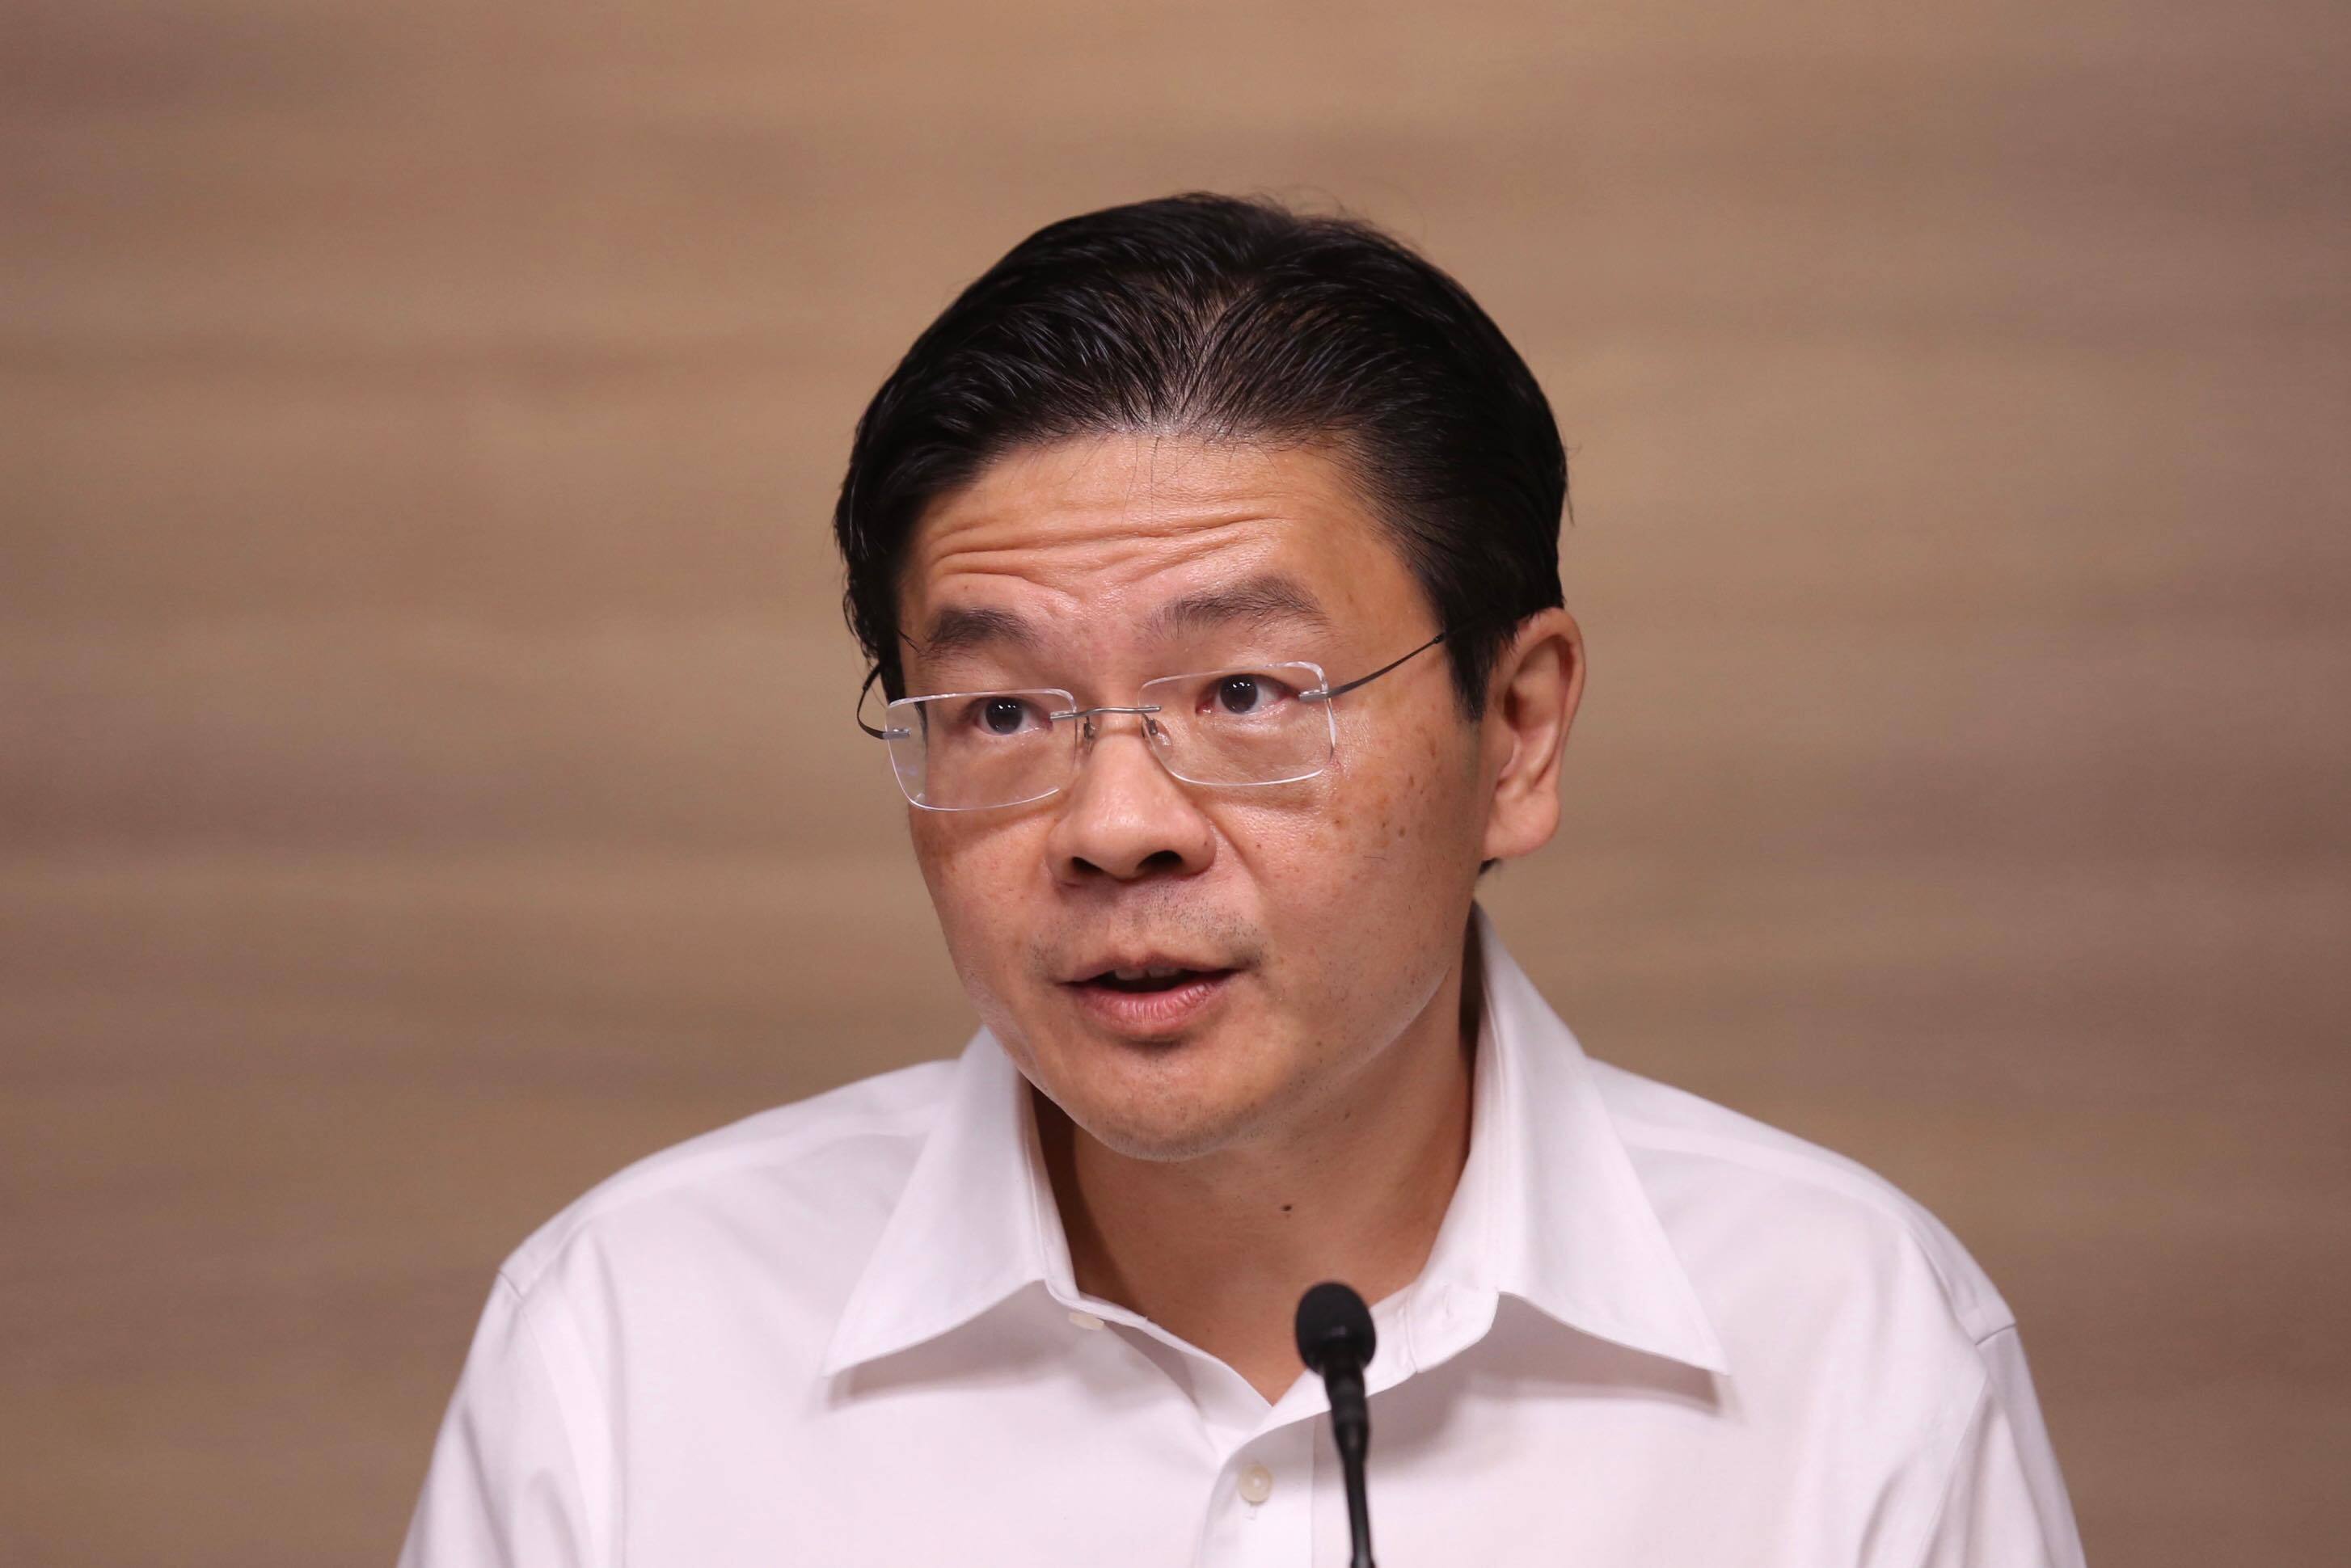 Lawrence Wong ‘overwhelming’ pick of Cabinet ministers as leader of 4G team: PM Lee